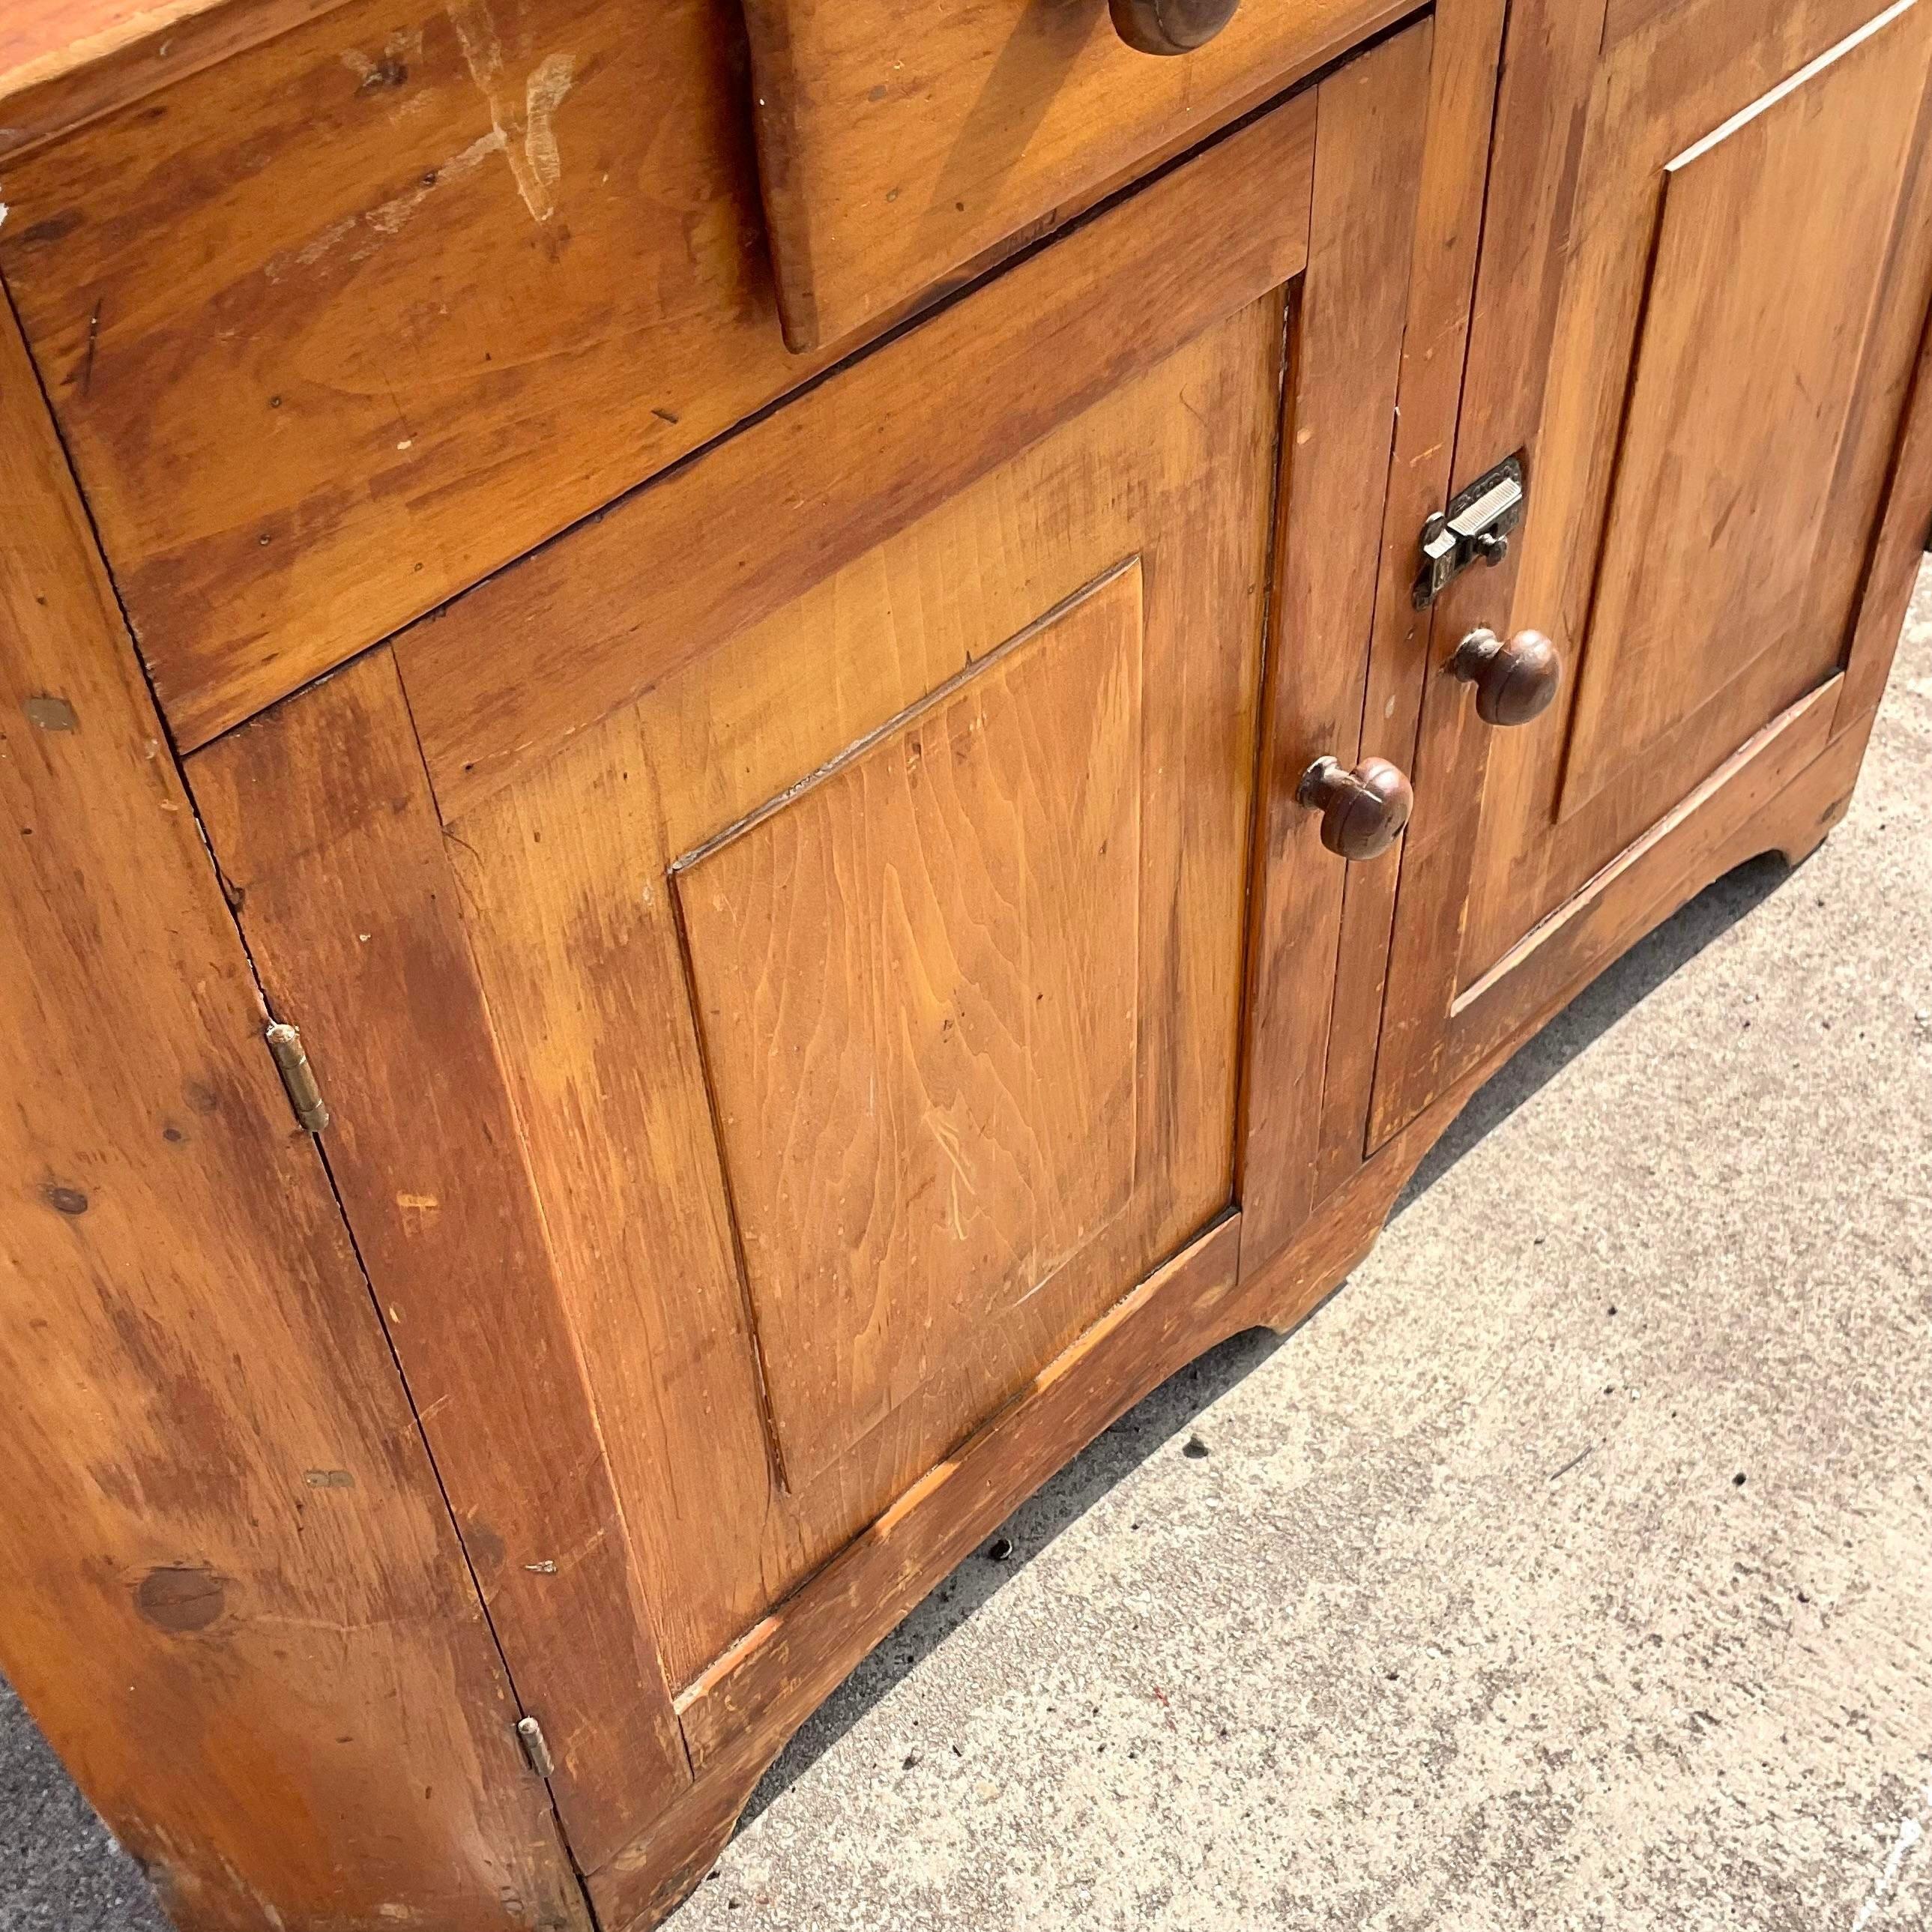 A stunning vintage Boho corner cabinet. An incredible 1800s design with a gorgeous patina from time. Lots of great storage below. Acquired from a Palm Beach estate.